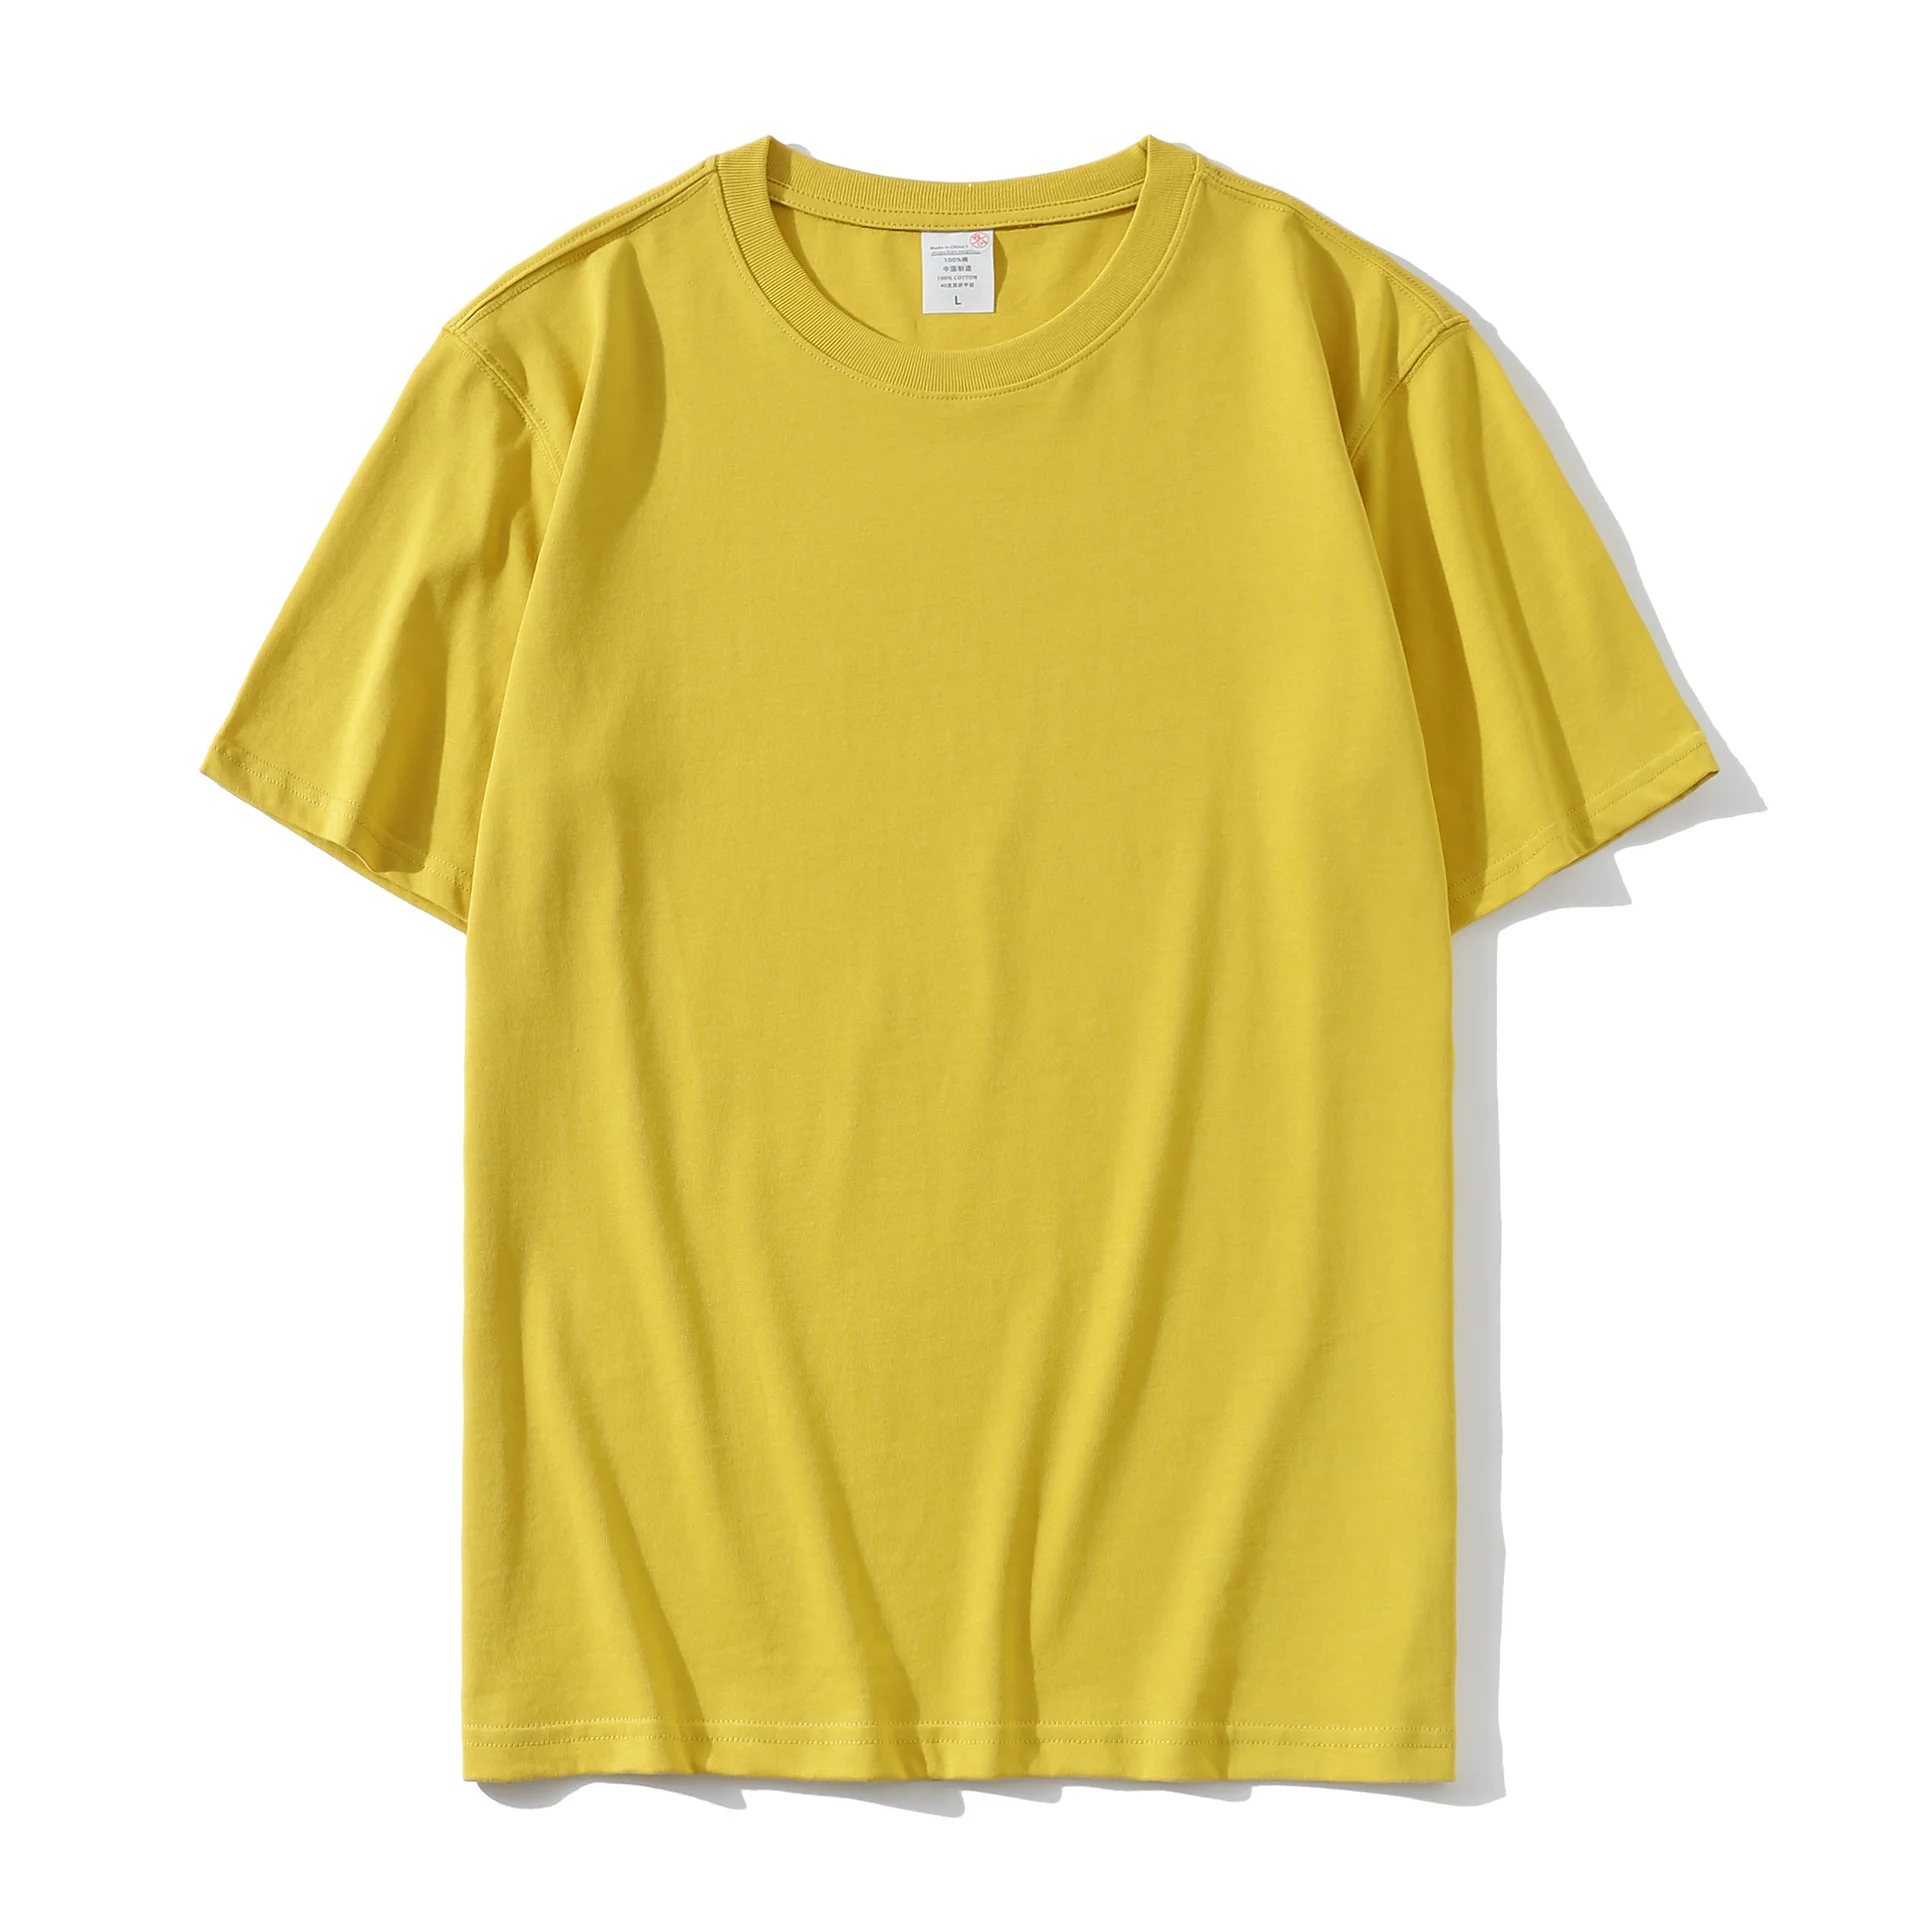 Wholesale Blank T shirts for Printing in Edmonton